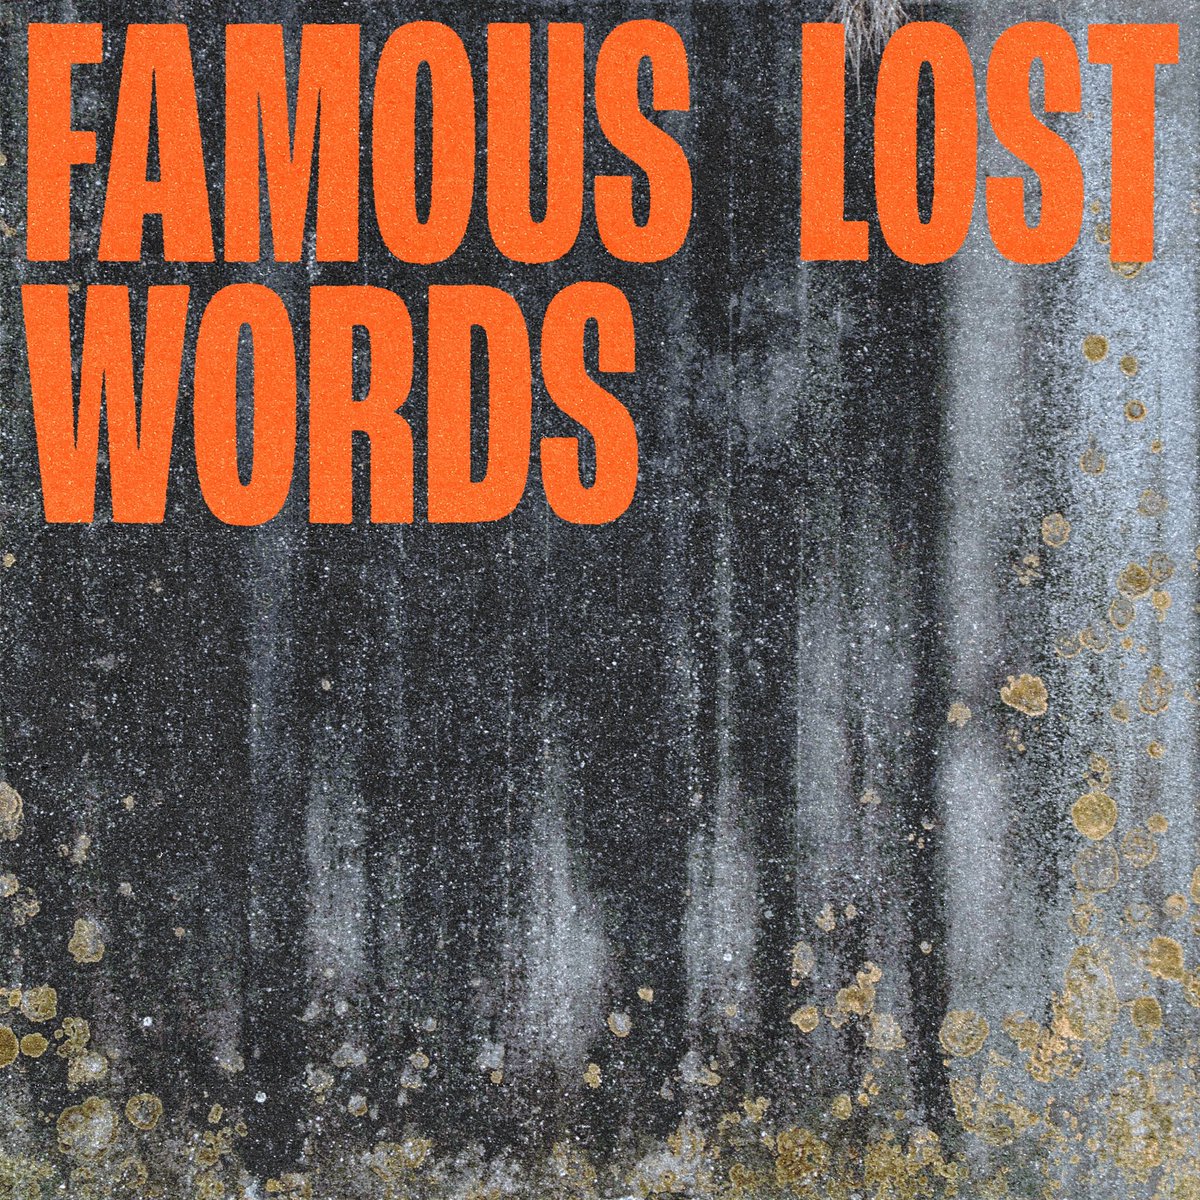 Short & punchy

Dutch noise punk alt rockers @BongloardNL have recently released their single ‘Famous Lost Words’. It’s short, sharp, very punchy & needs to be checked out!

#newmusic #altrock